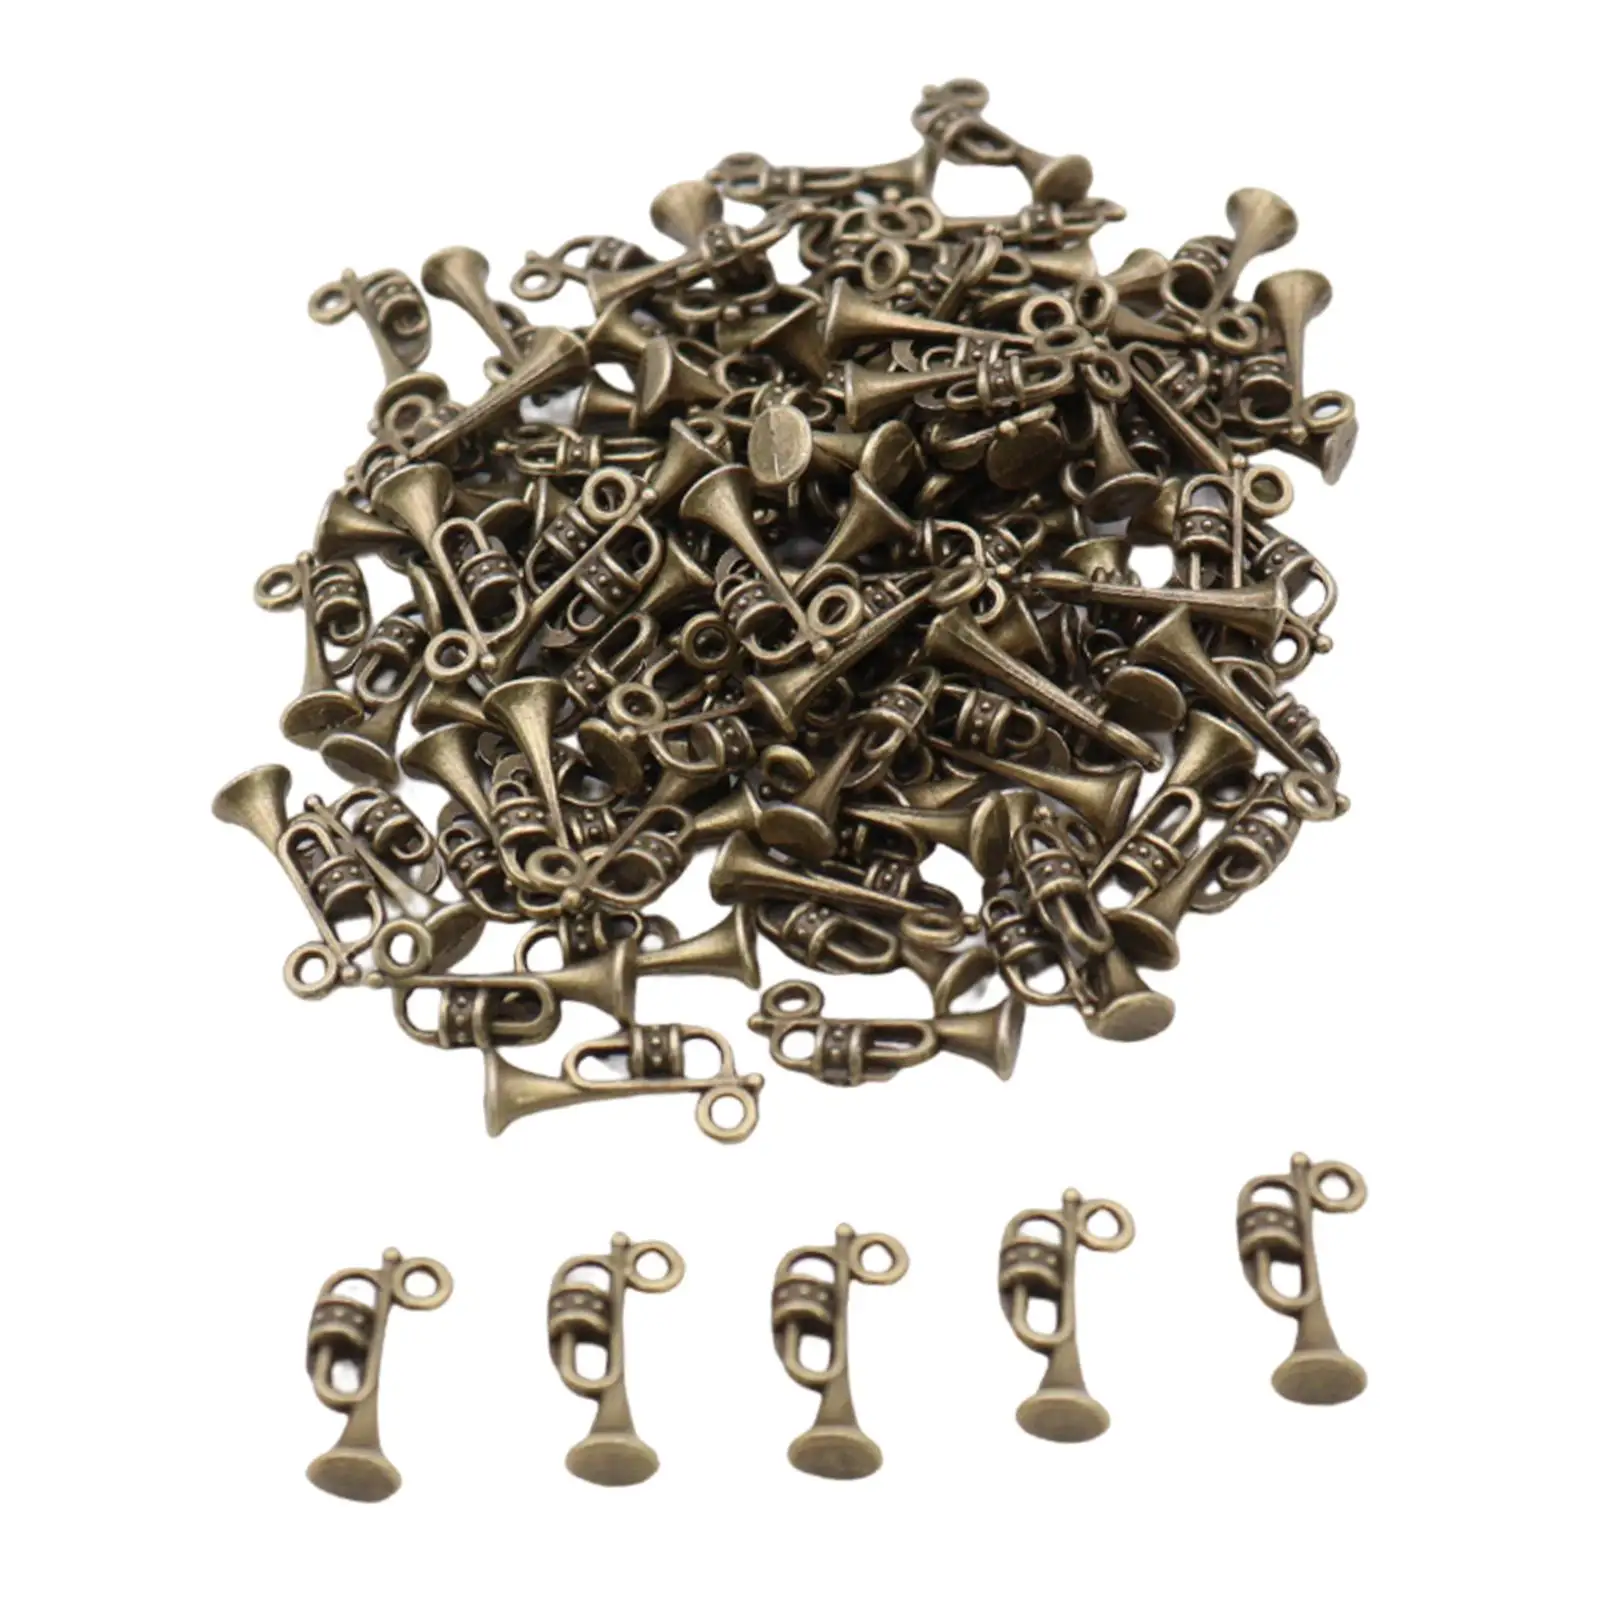 100x Metal Pendant Beads Key Charms Charms Pendants Trumpet Music Pendants for Bracelet Earring Necklace Jewelry Making